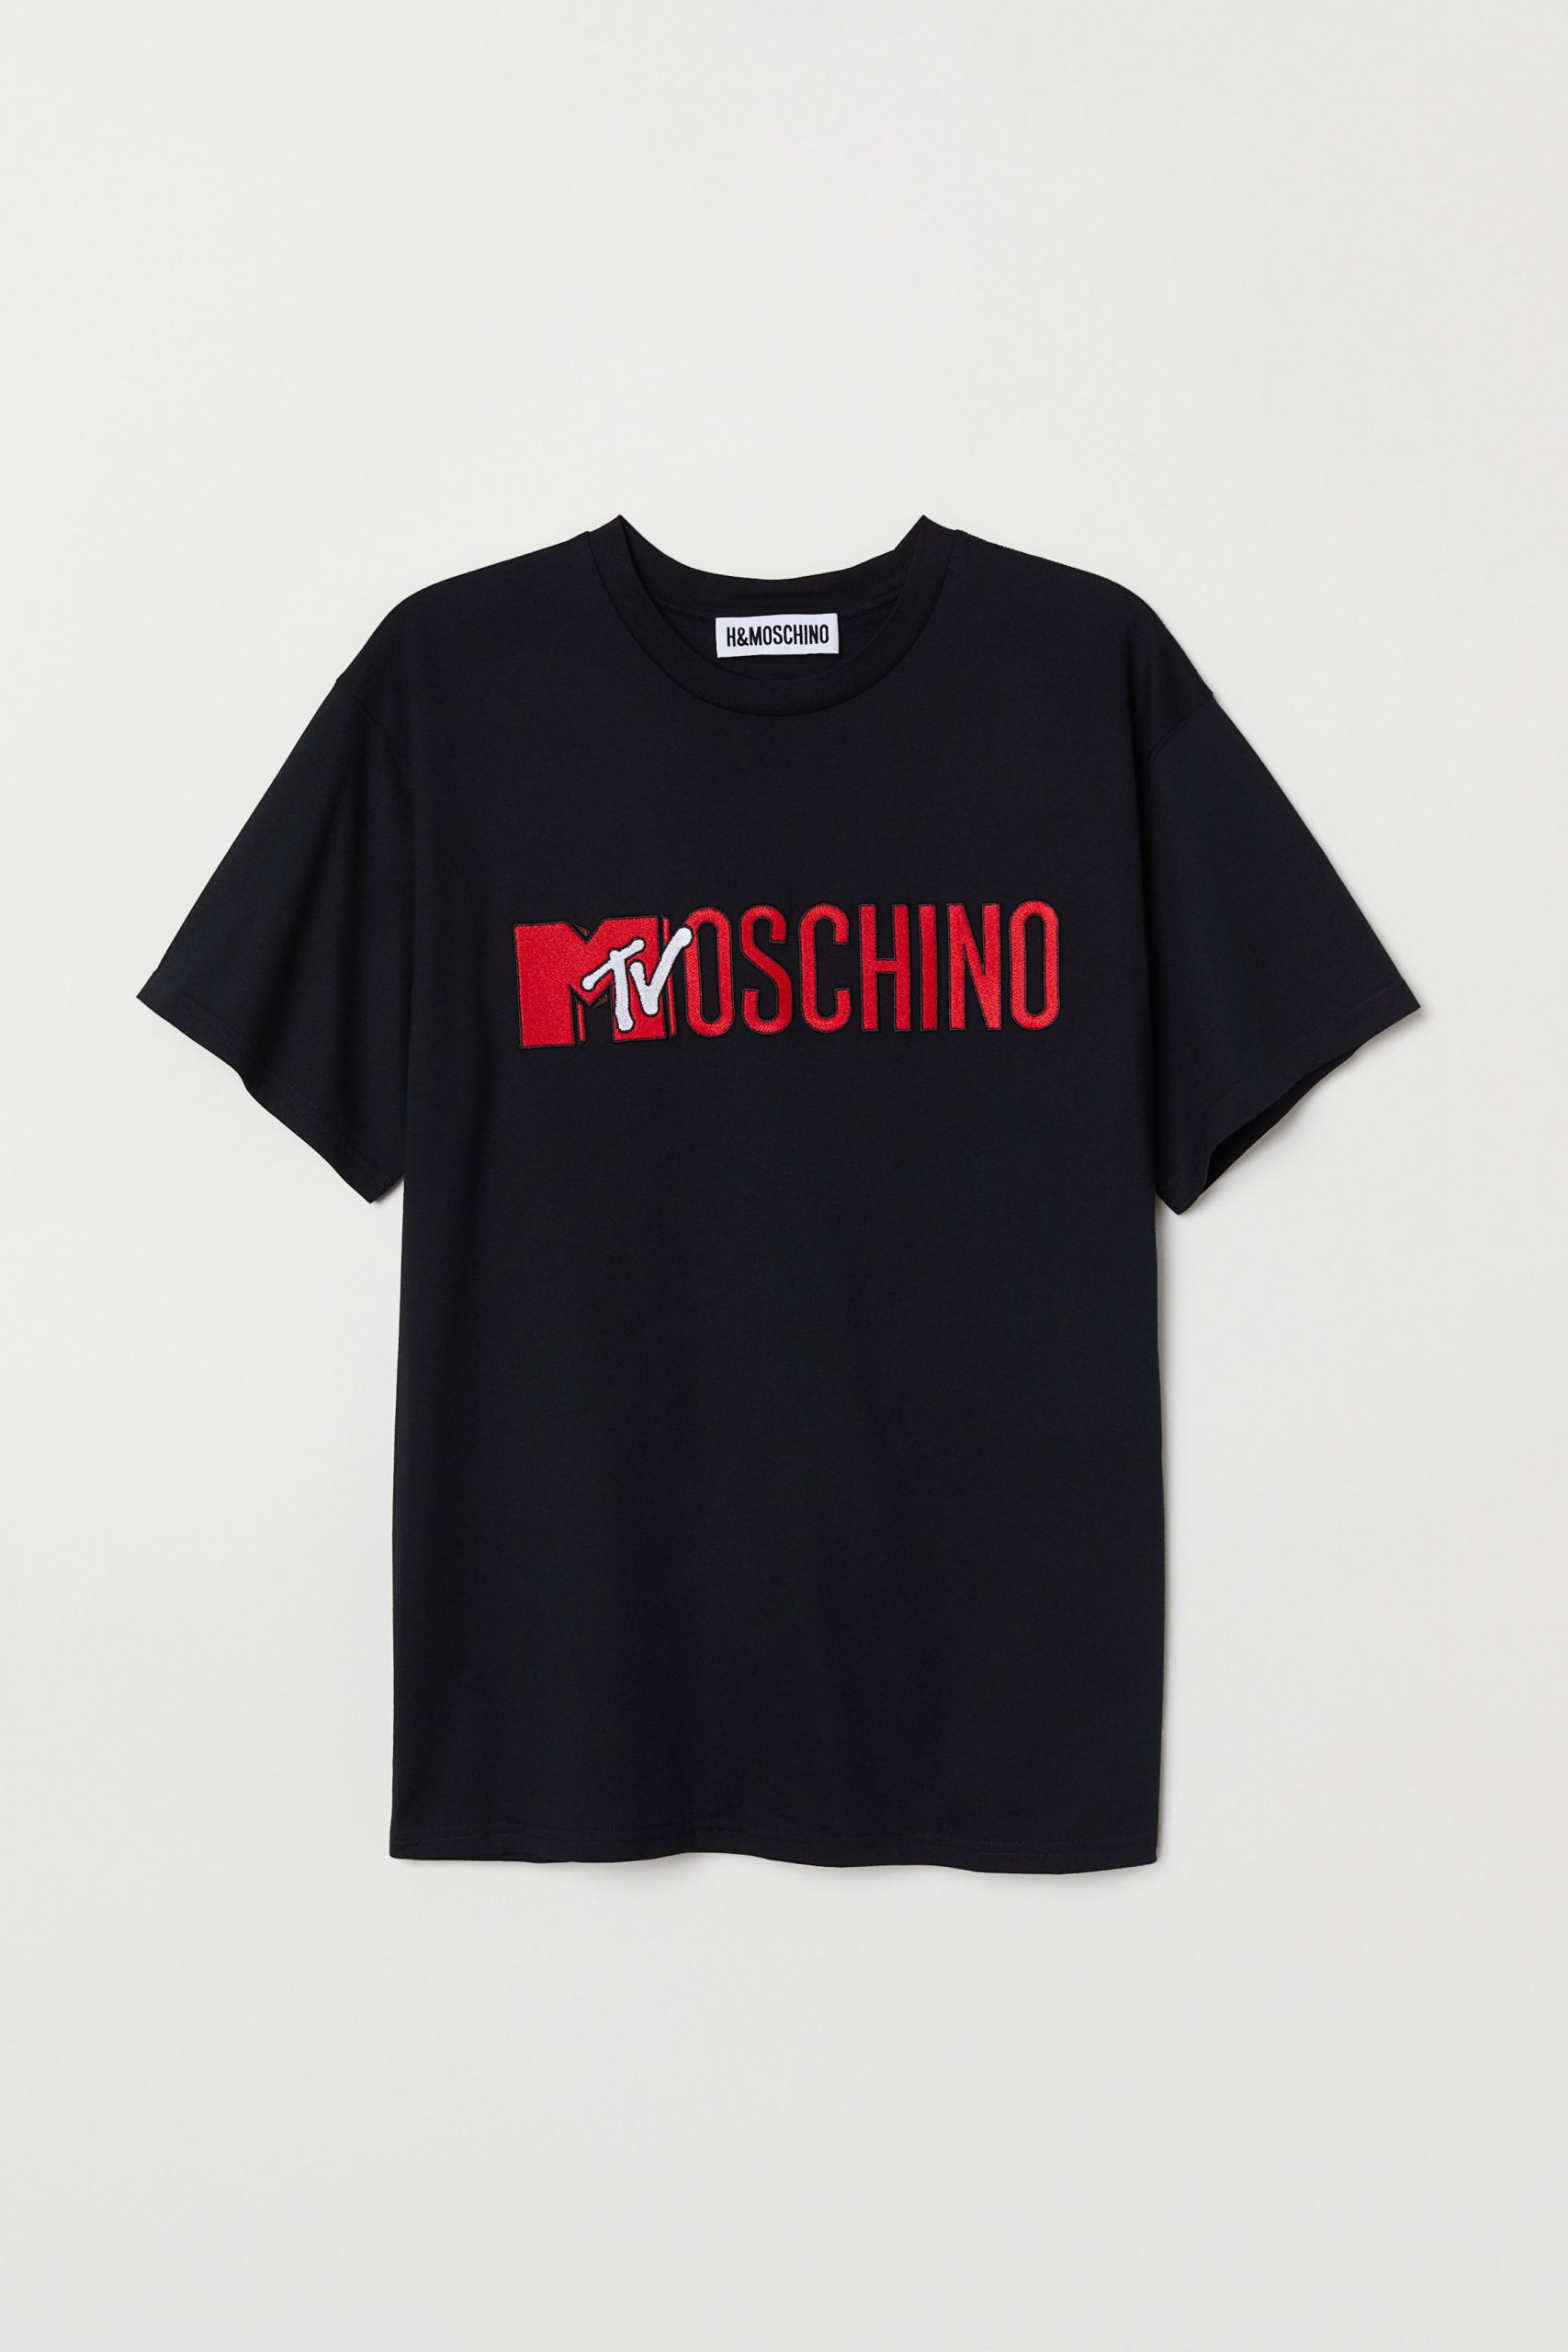 Tshirt With Embroidery  Black   Hm  Shirts Moschino